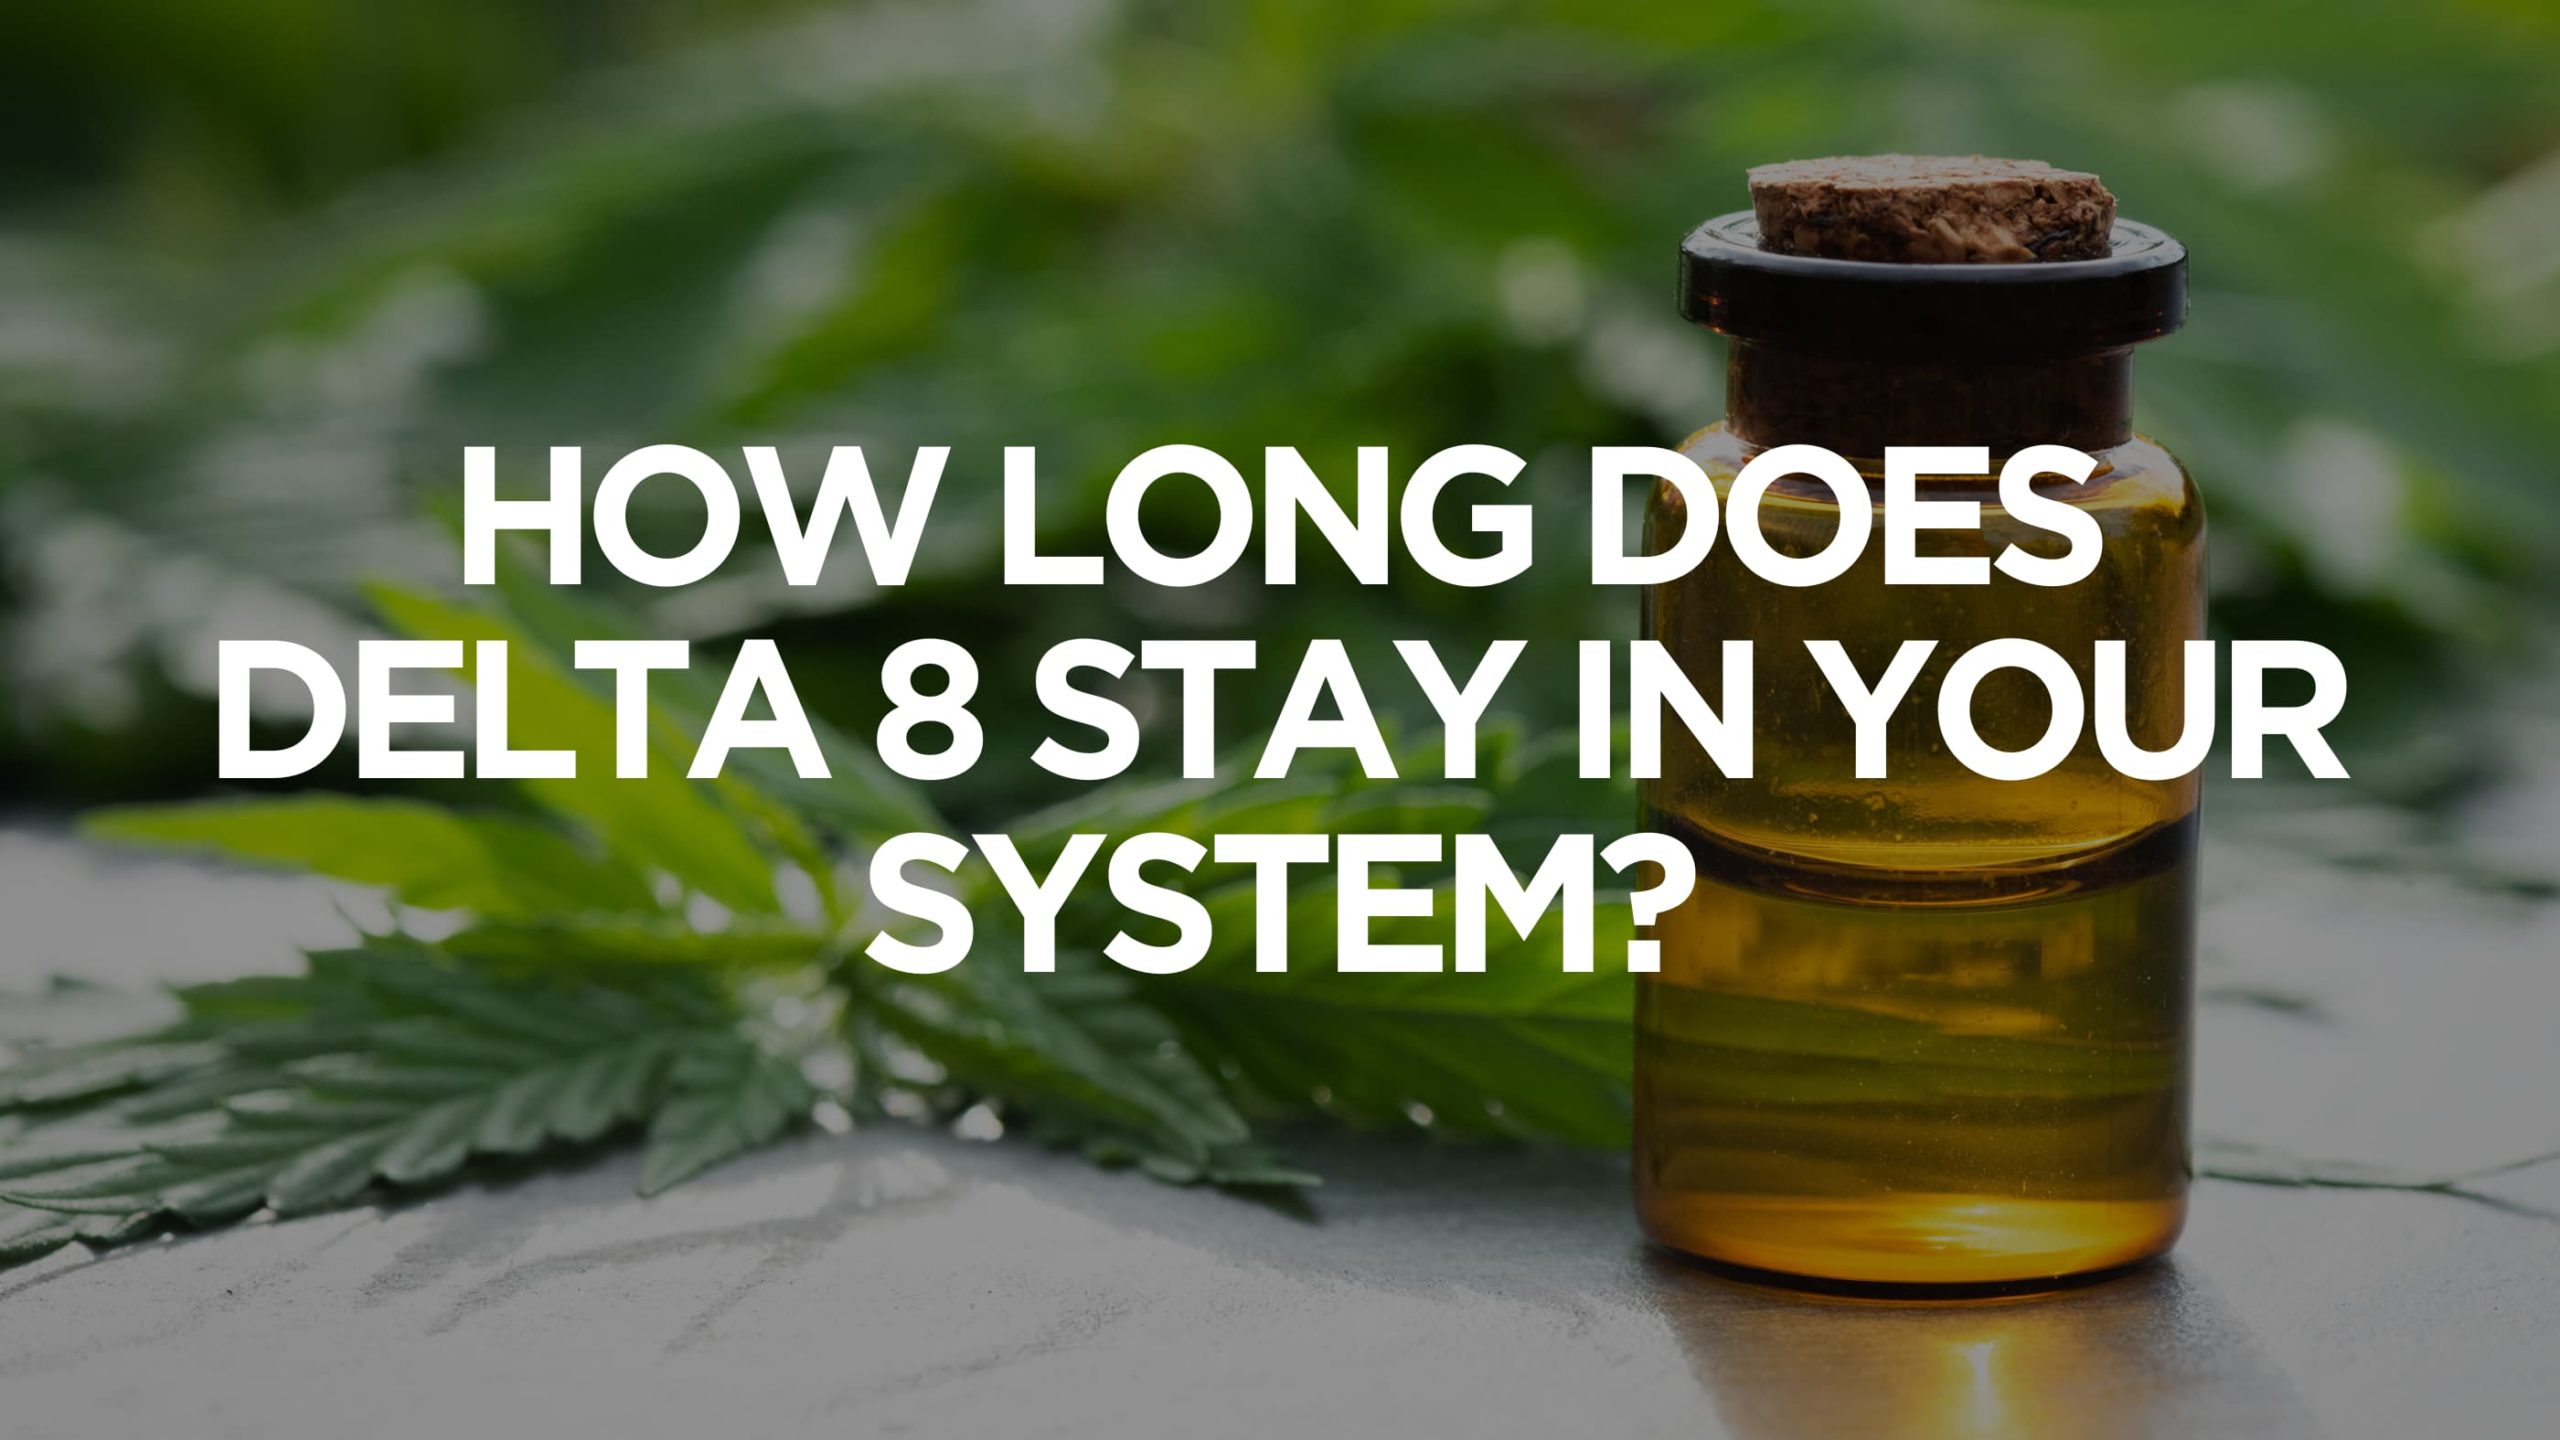 How to Get Rid of CBD in System Quickly & Safely